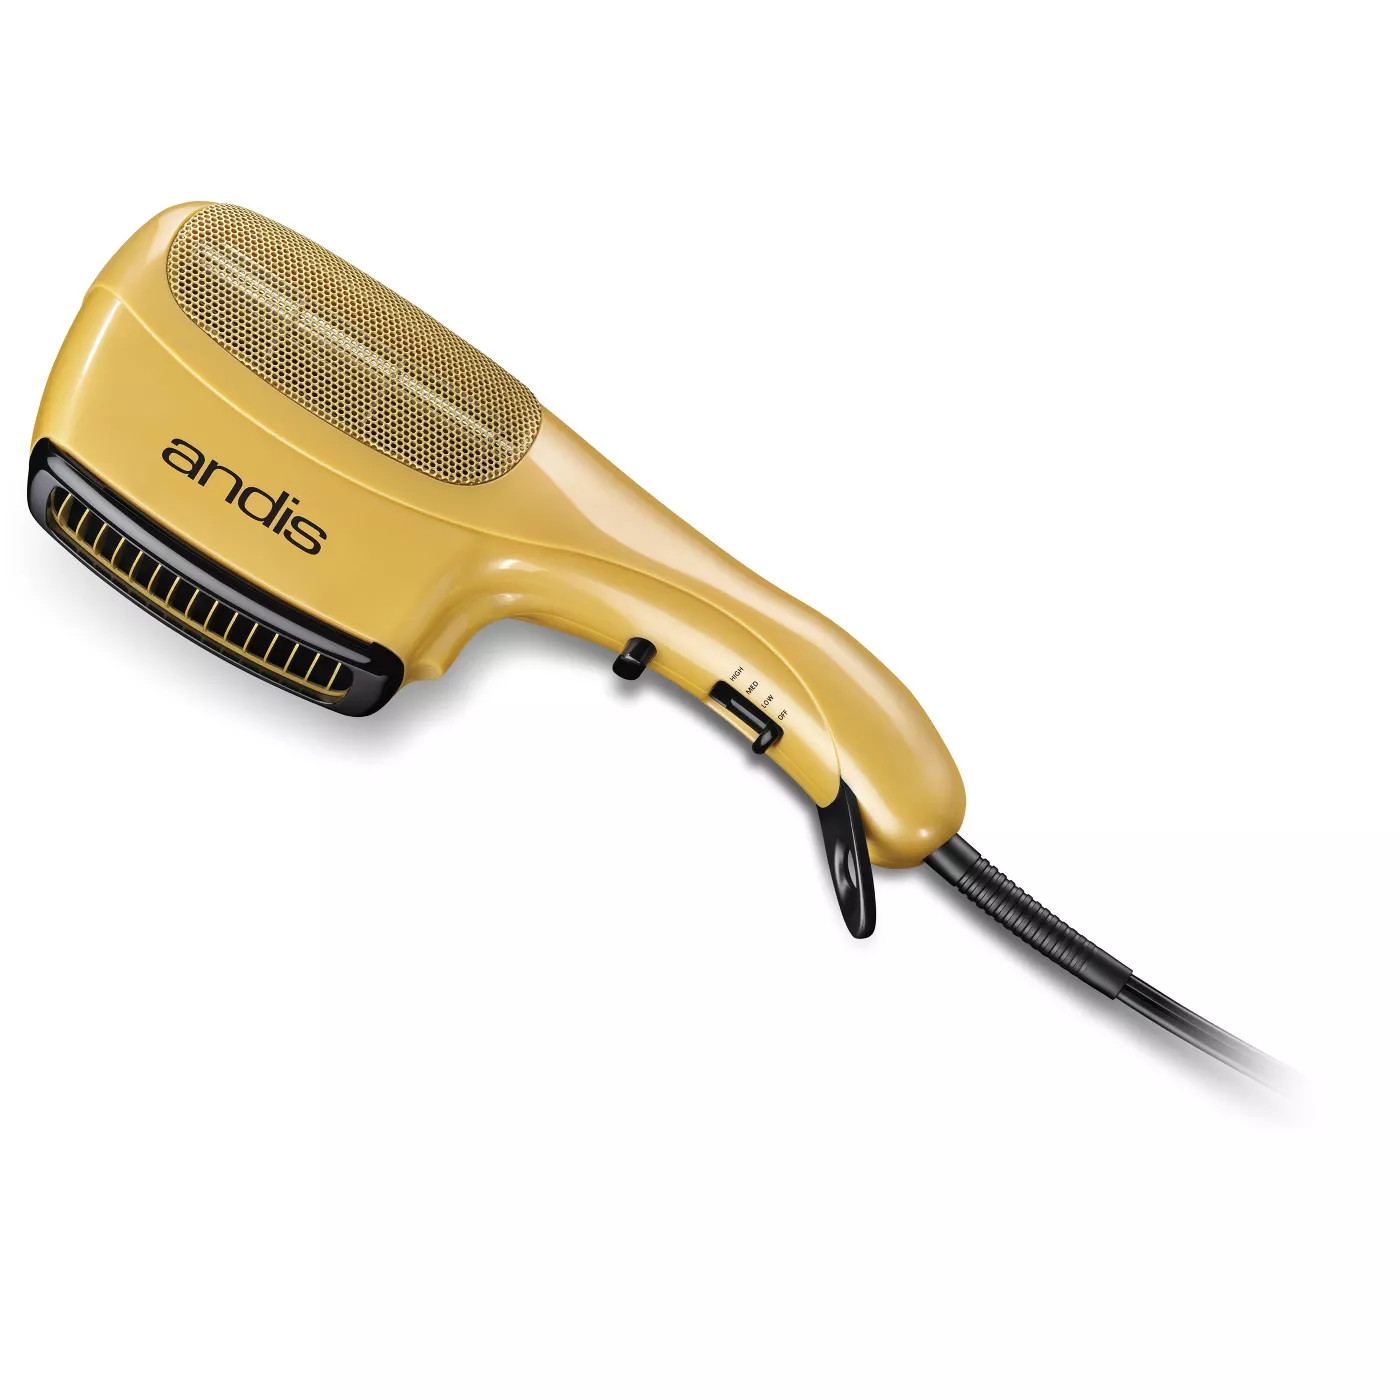 Andis Ceramic Styler 1875 Blow Dryer Dual Voltage HS-2 Yellow